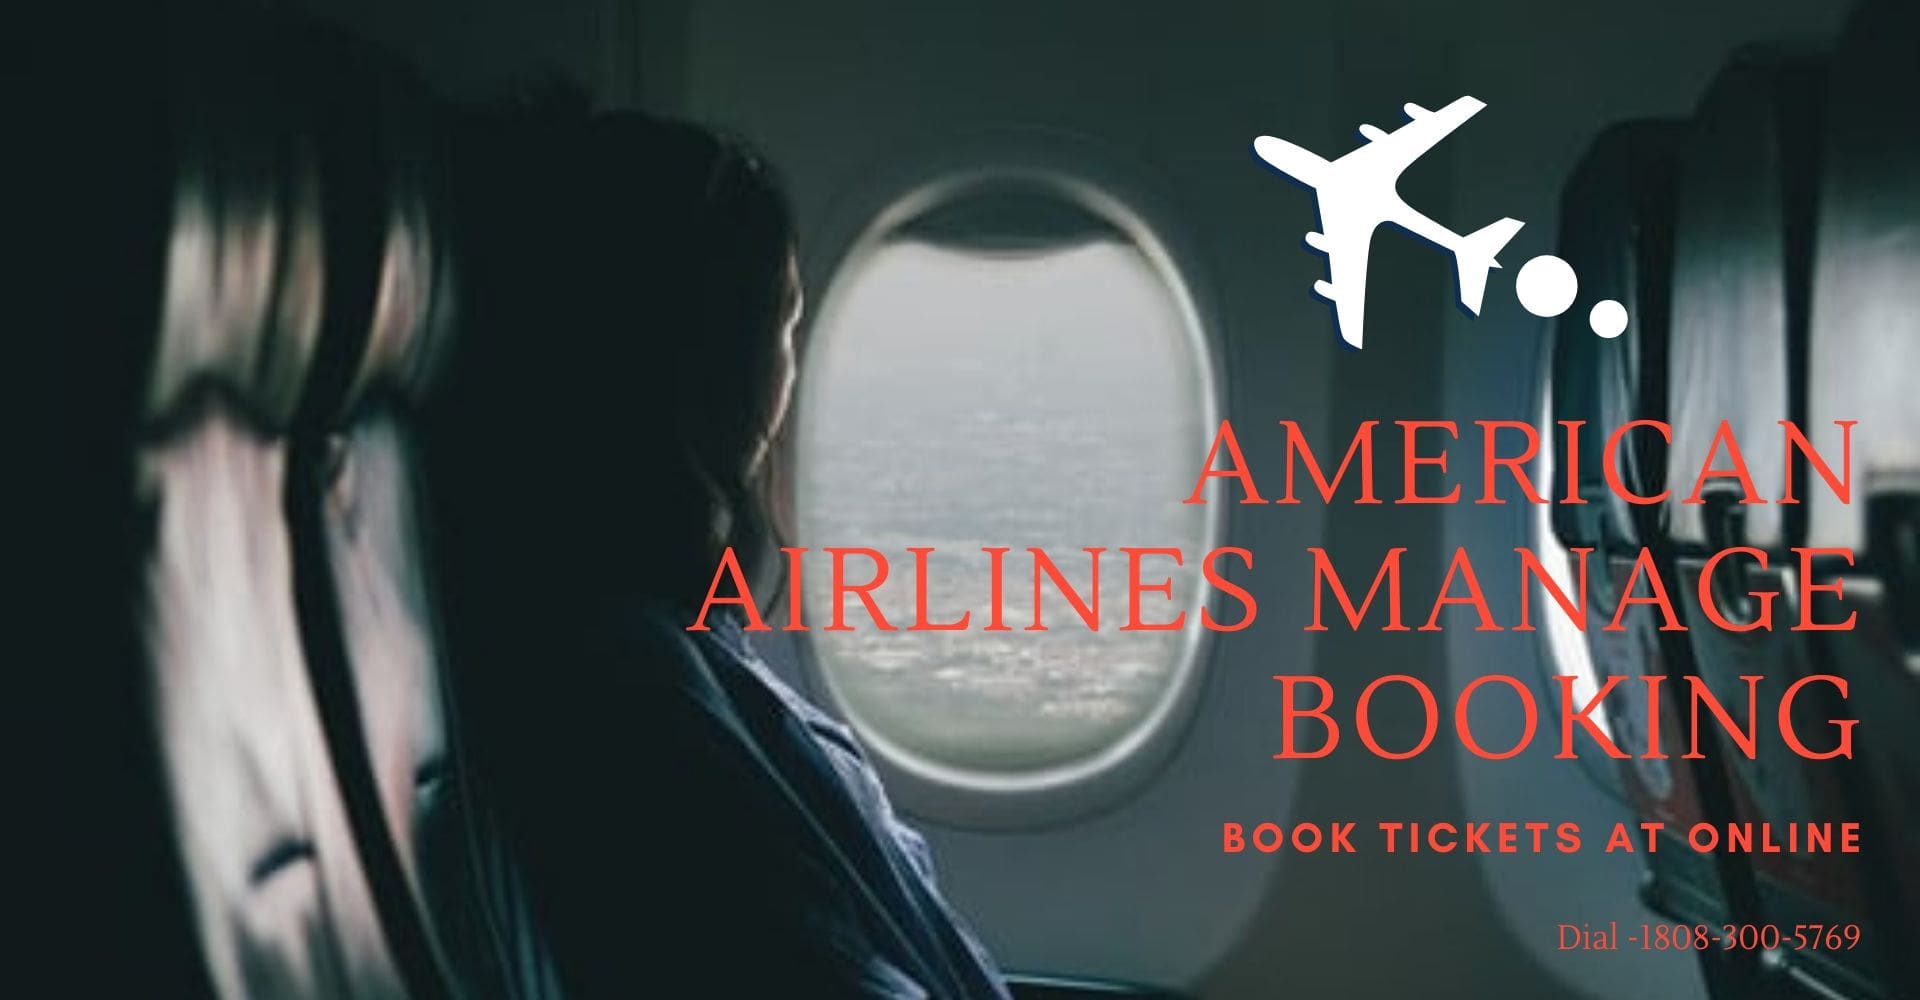 2020-03-05-03-26-44american airlines manage booking